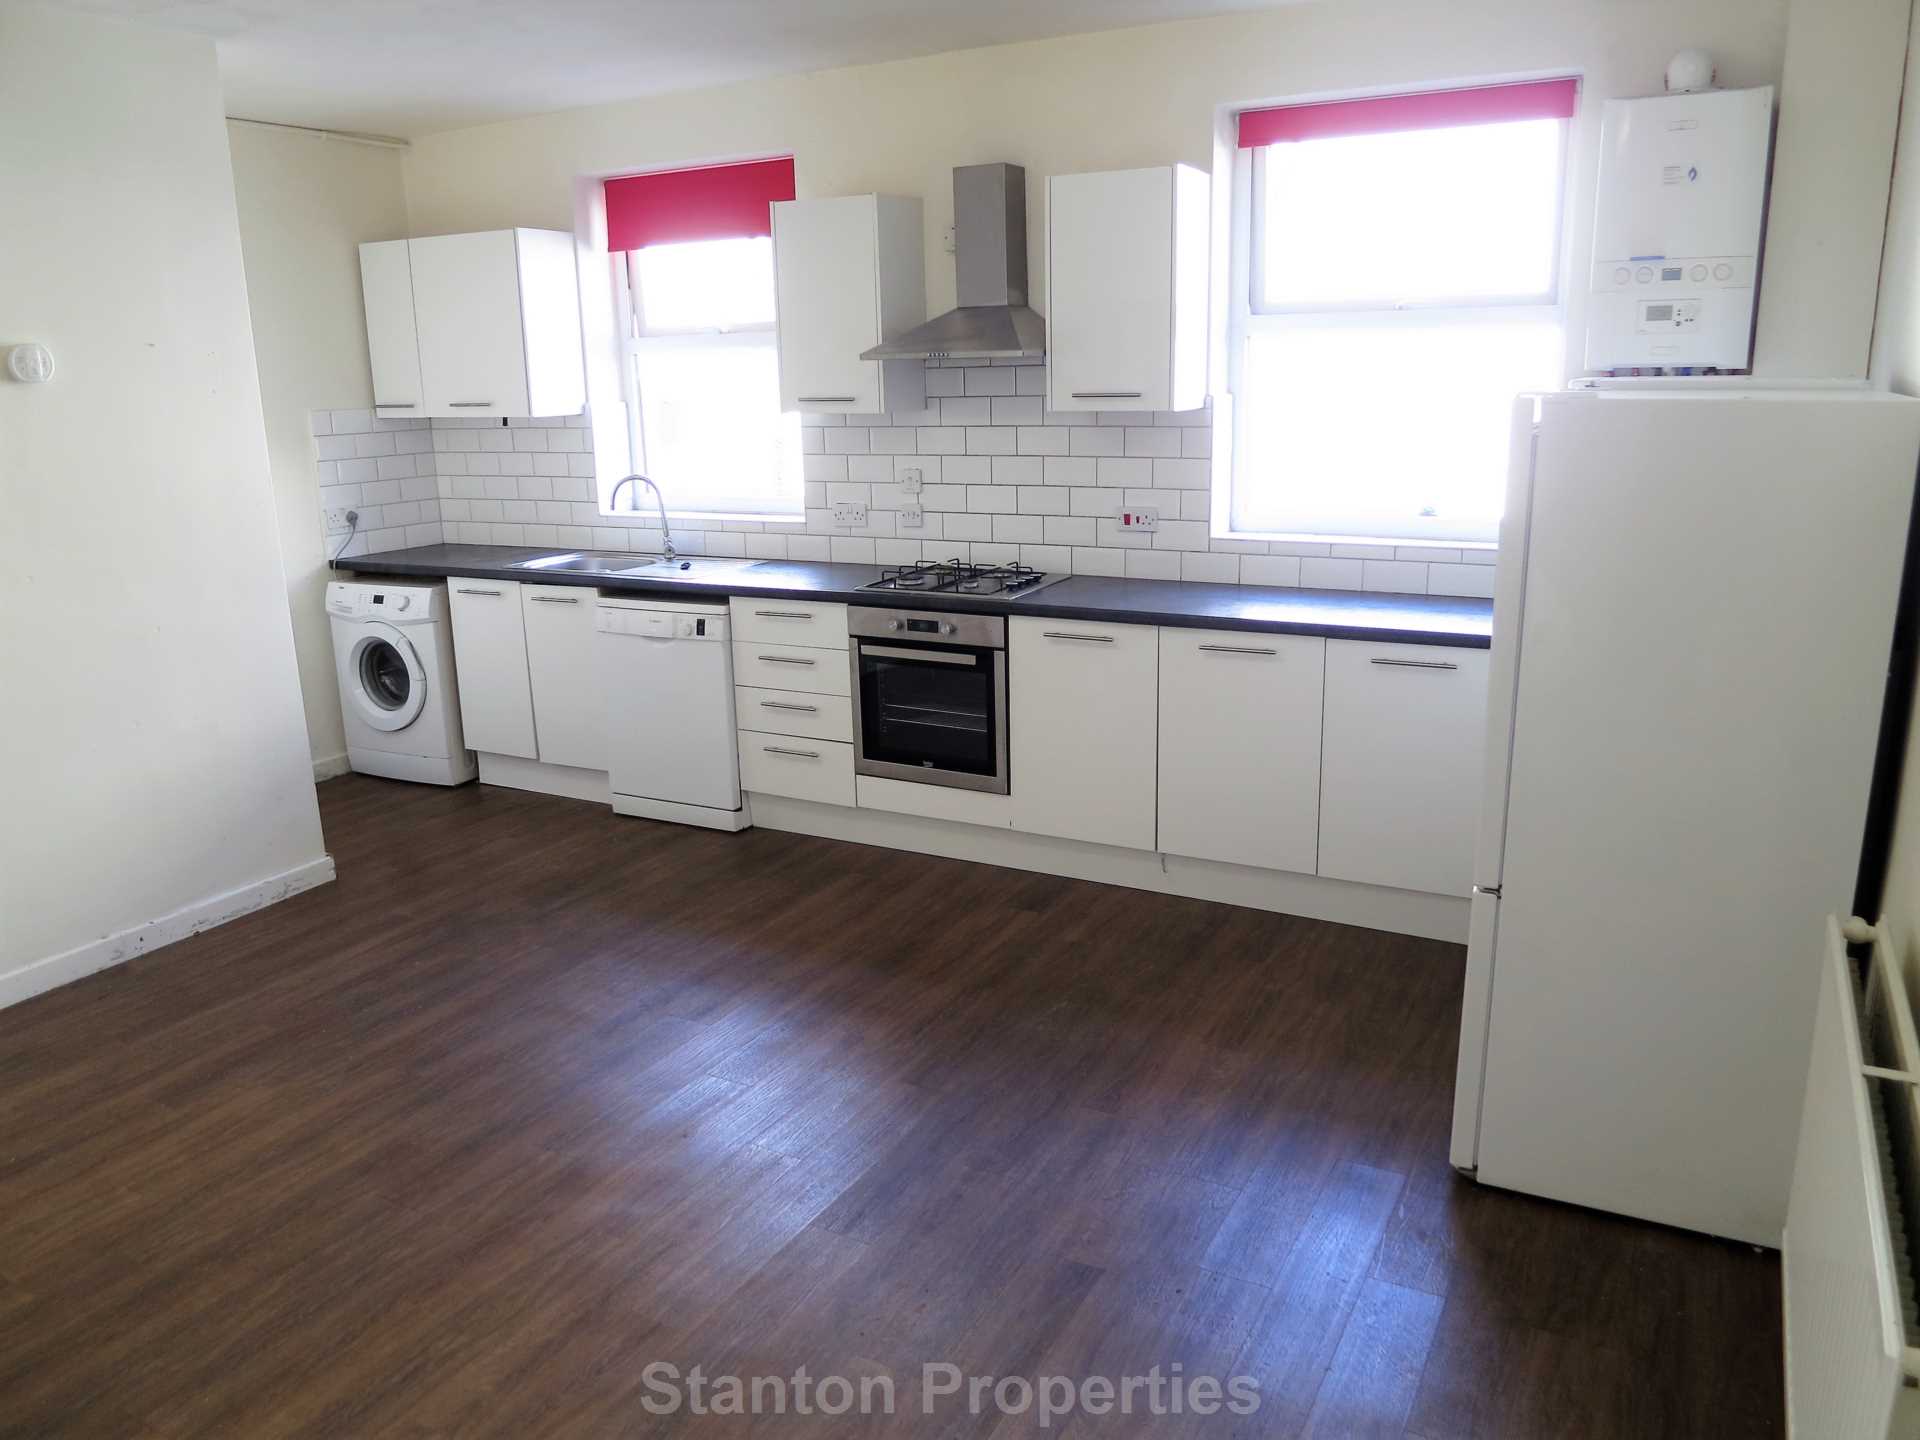 See Video Tour, £120 pppw, Copson Street, Withington, Image 6